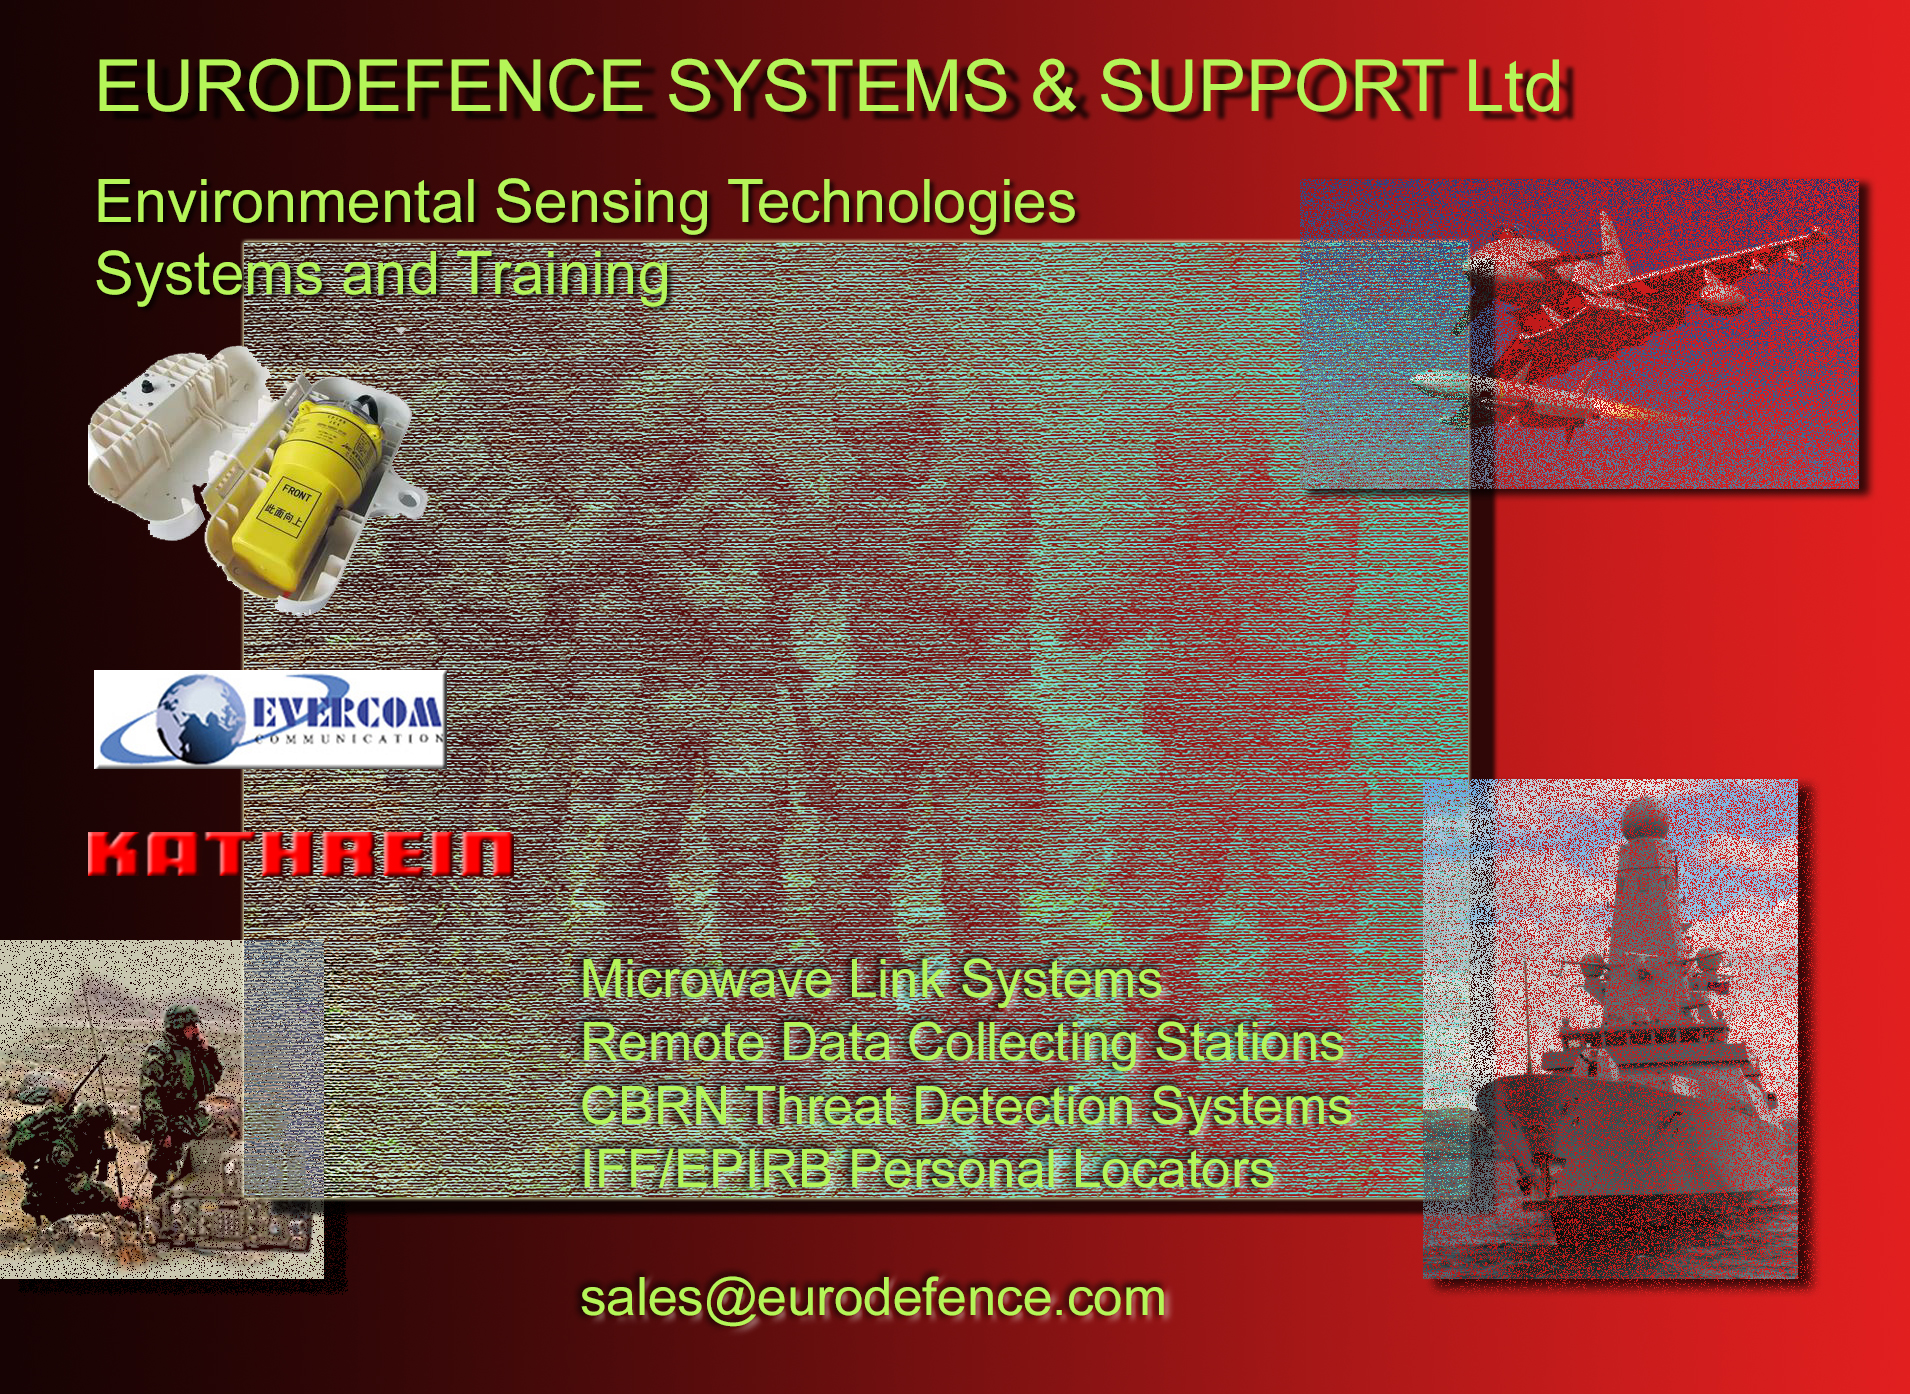 Eurodefence Systems : Environmental Sensing Technologies Systems and Training